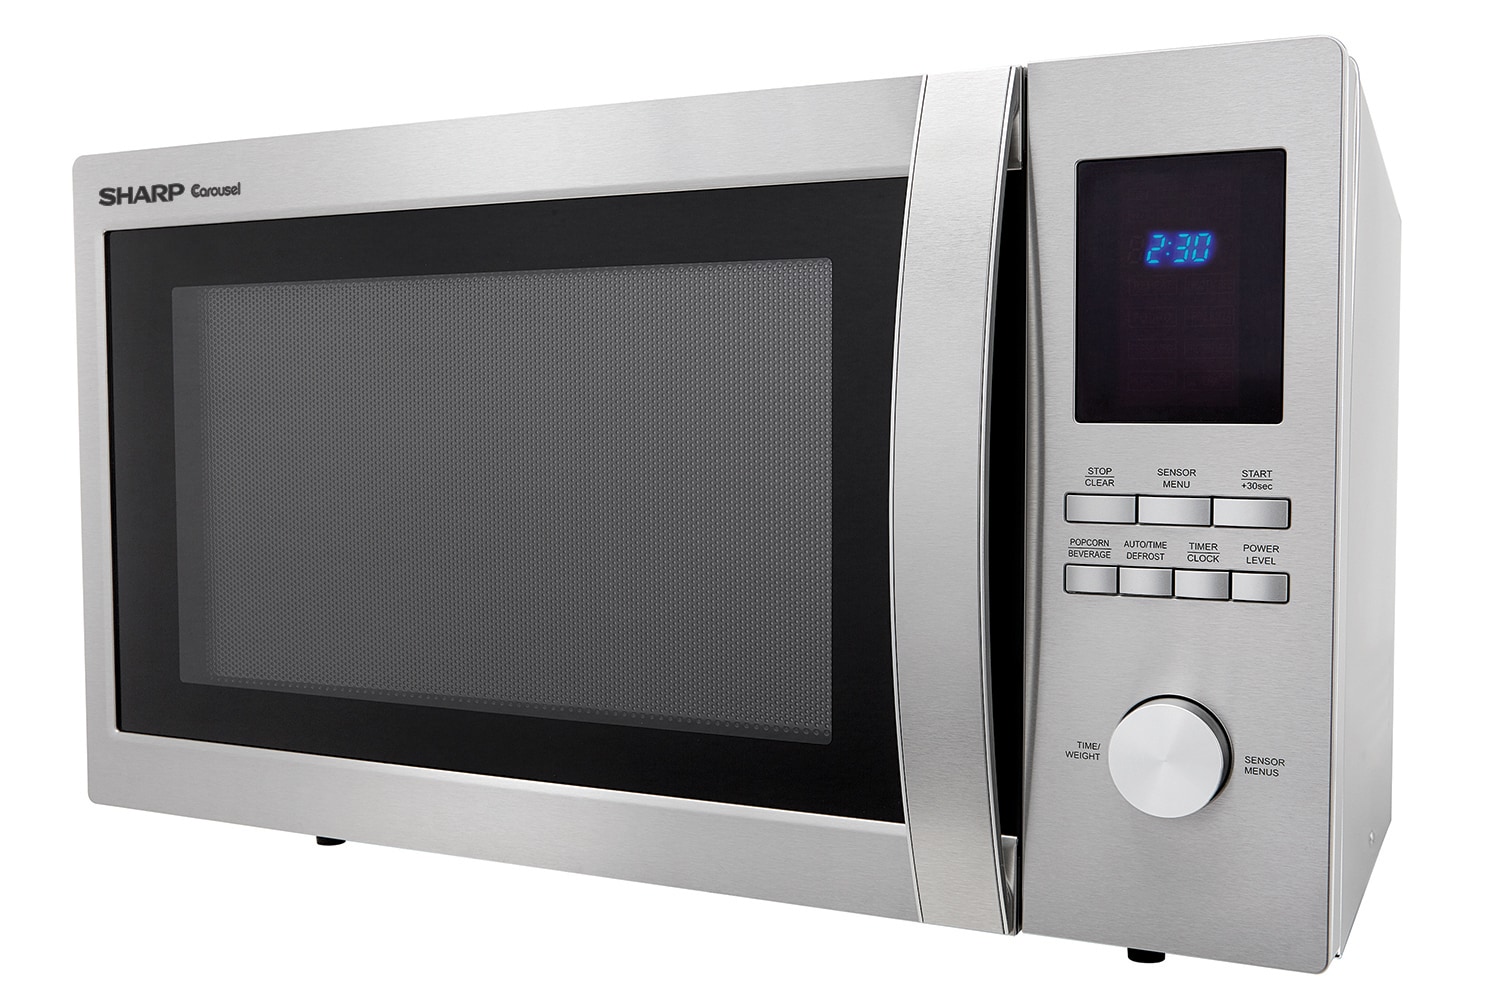 Sharp R1200 1.5 Cu. Ft. Over-the-Counter Microwave Oven with 1,100